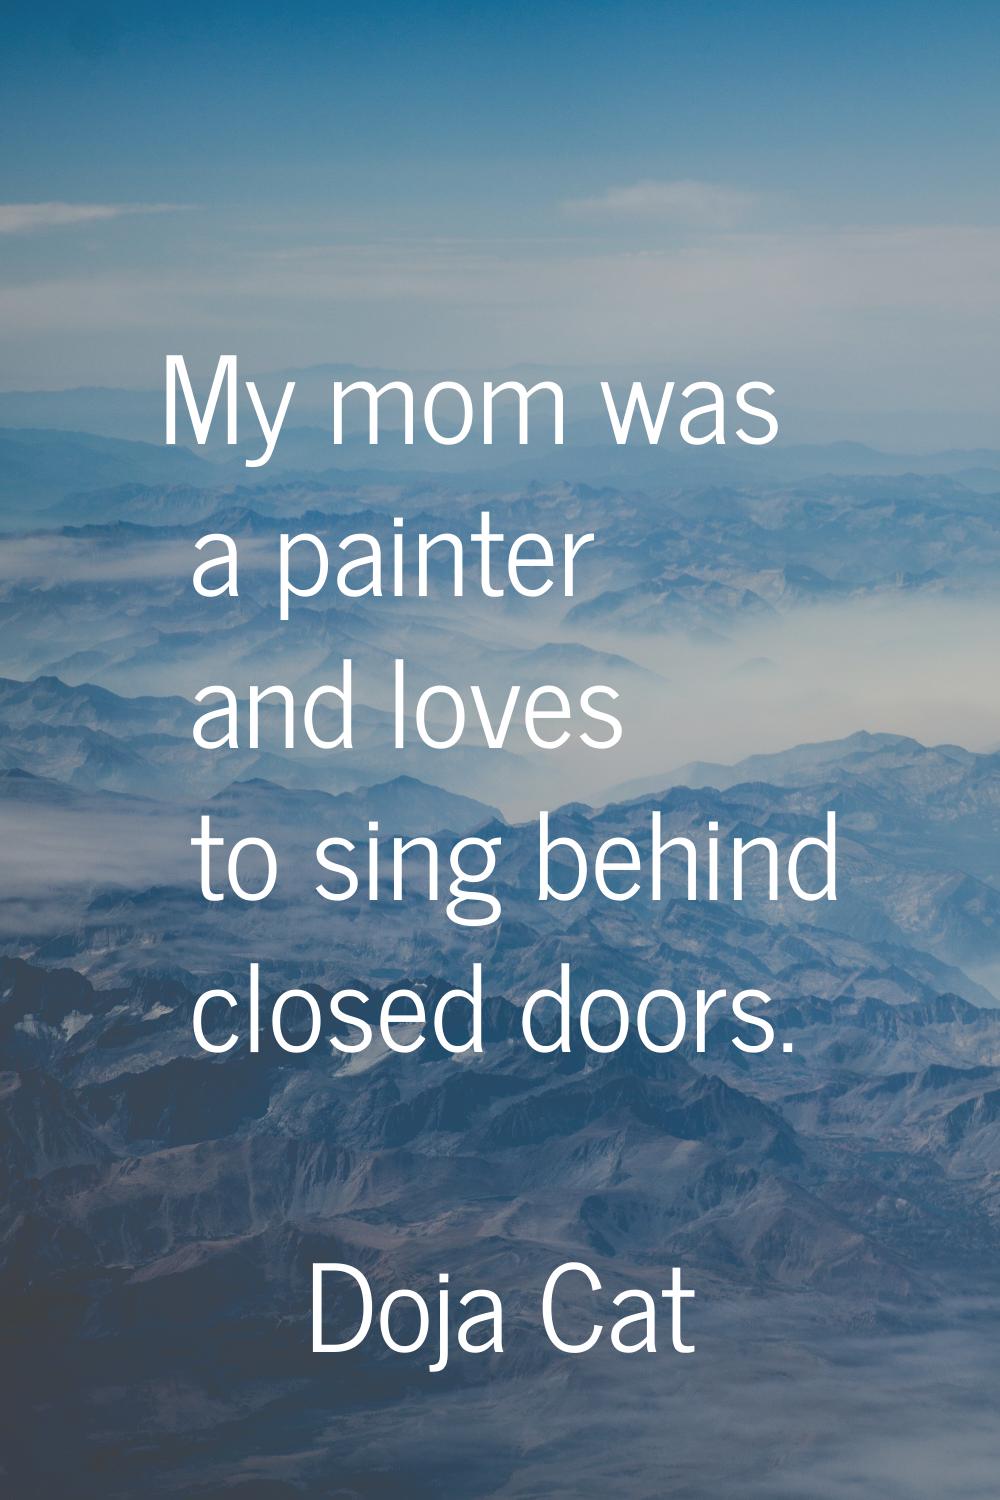 My mom was a painter and loves to sing behind closed doors.